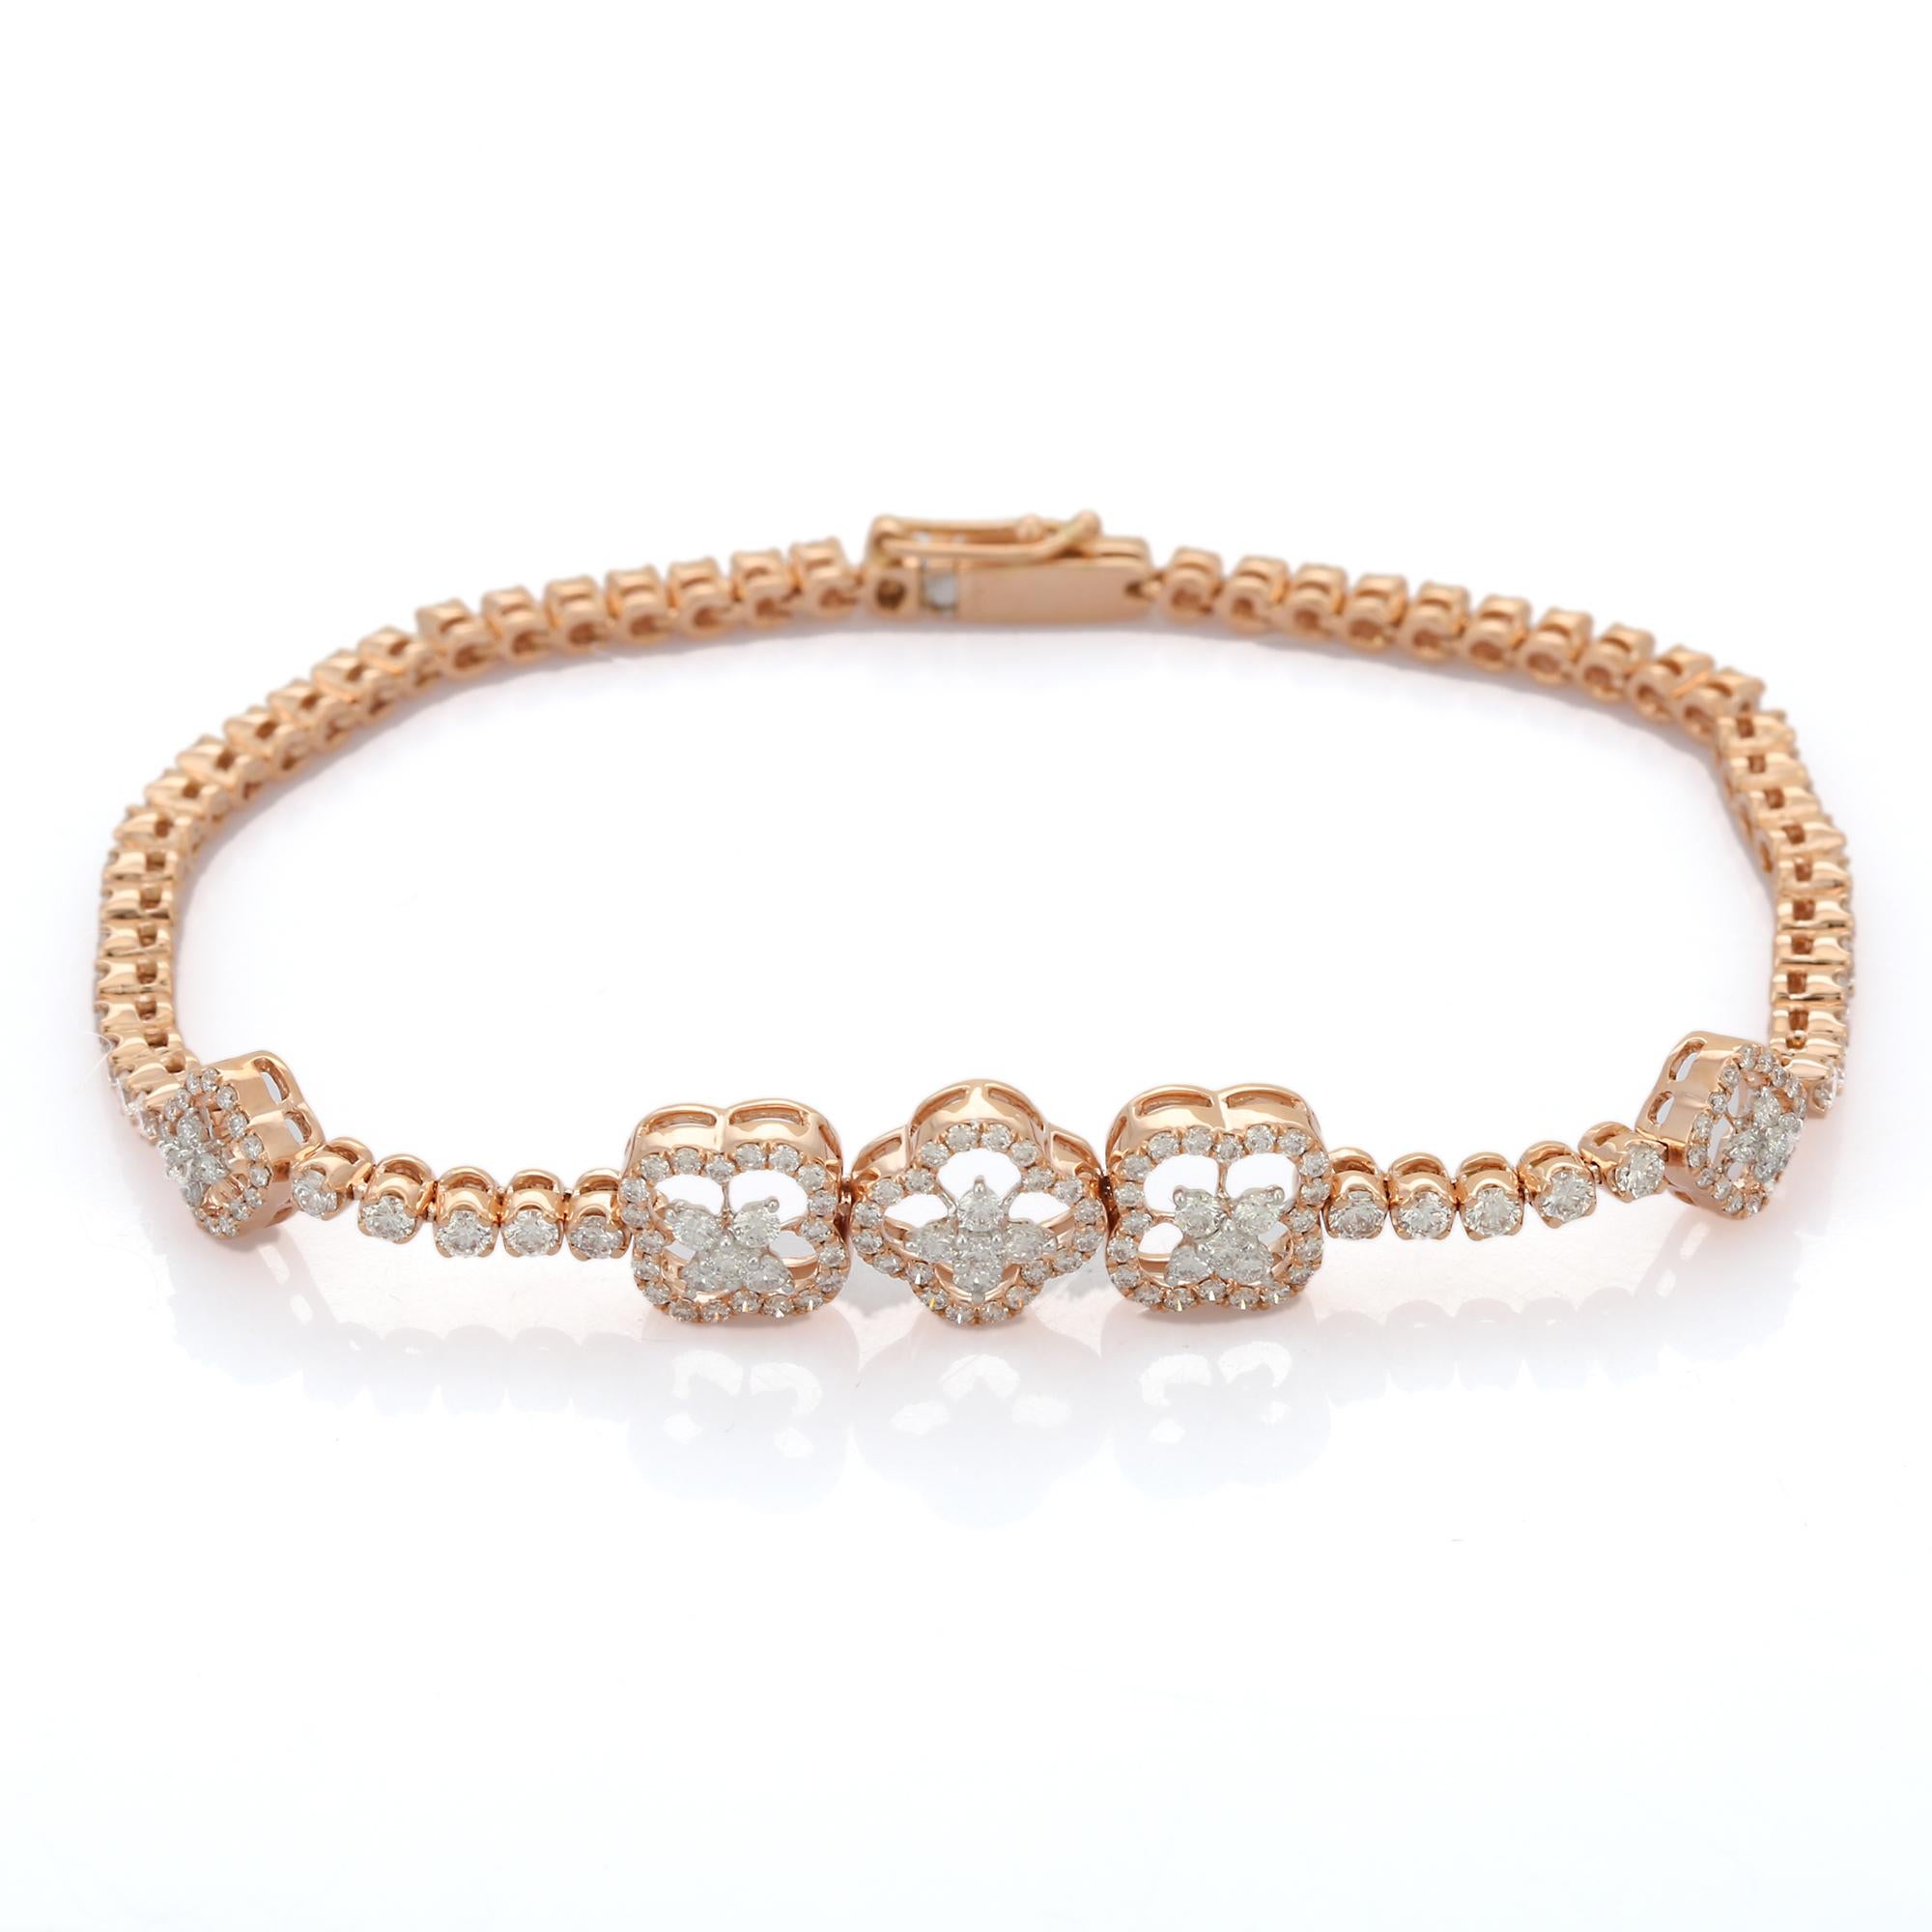 This Diamond Floral Engagement Bracelet in 14K gold showcases sparkling natural diamonds, weighing 2.89 carats. 
April birthstone diamond brings love, fame, success and prosperity.
Designed with diamonds set in a flower and on the chain to make you